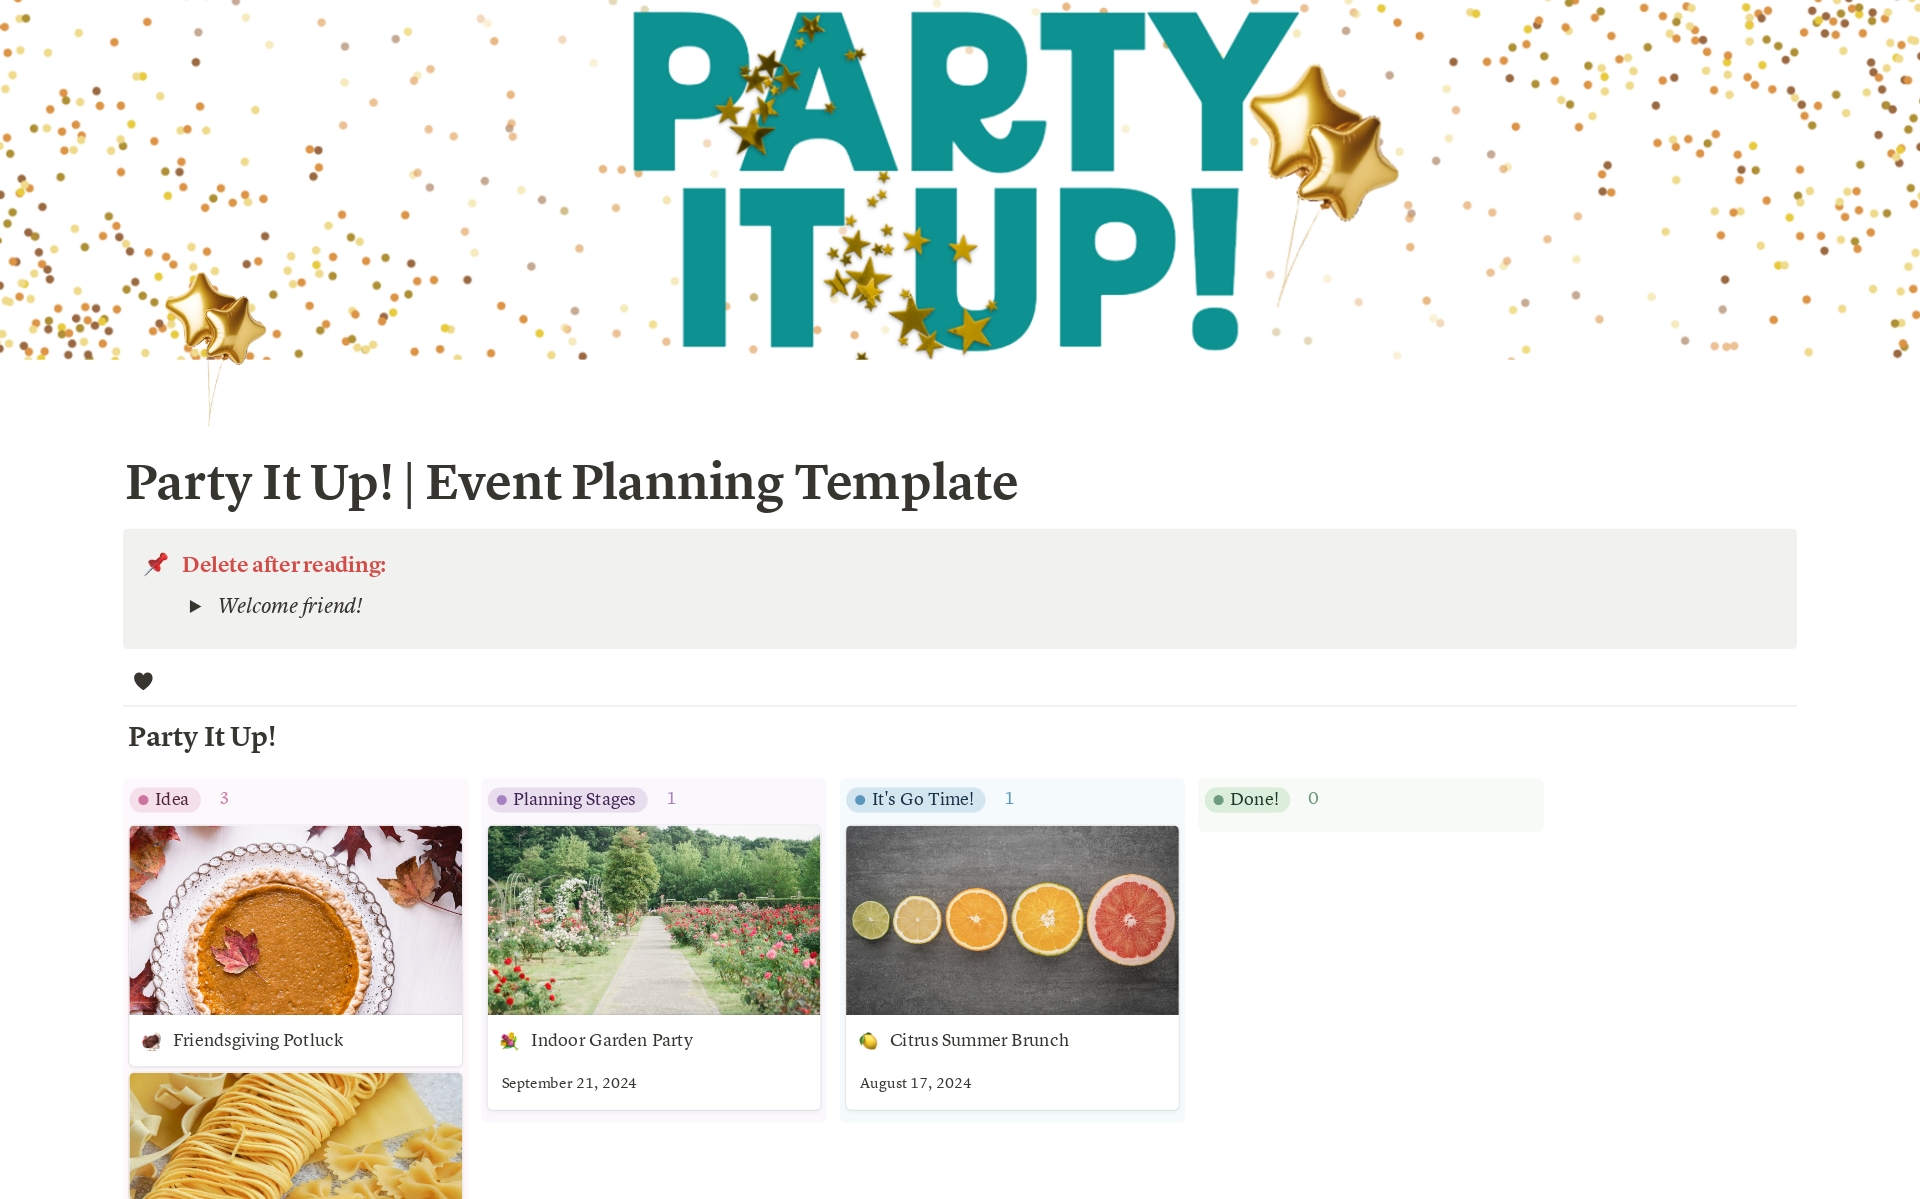 This template is used to plan parties and events and can be easily adapted to meet your personal needs.